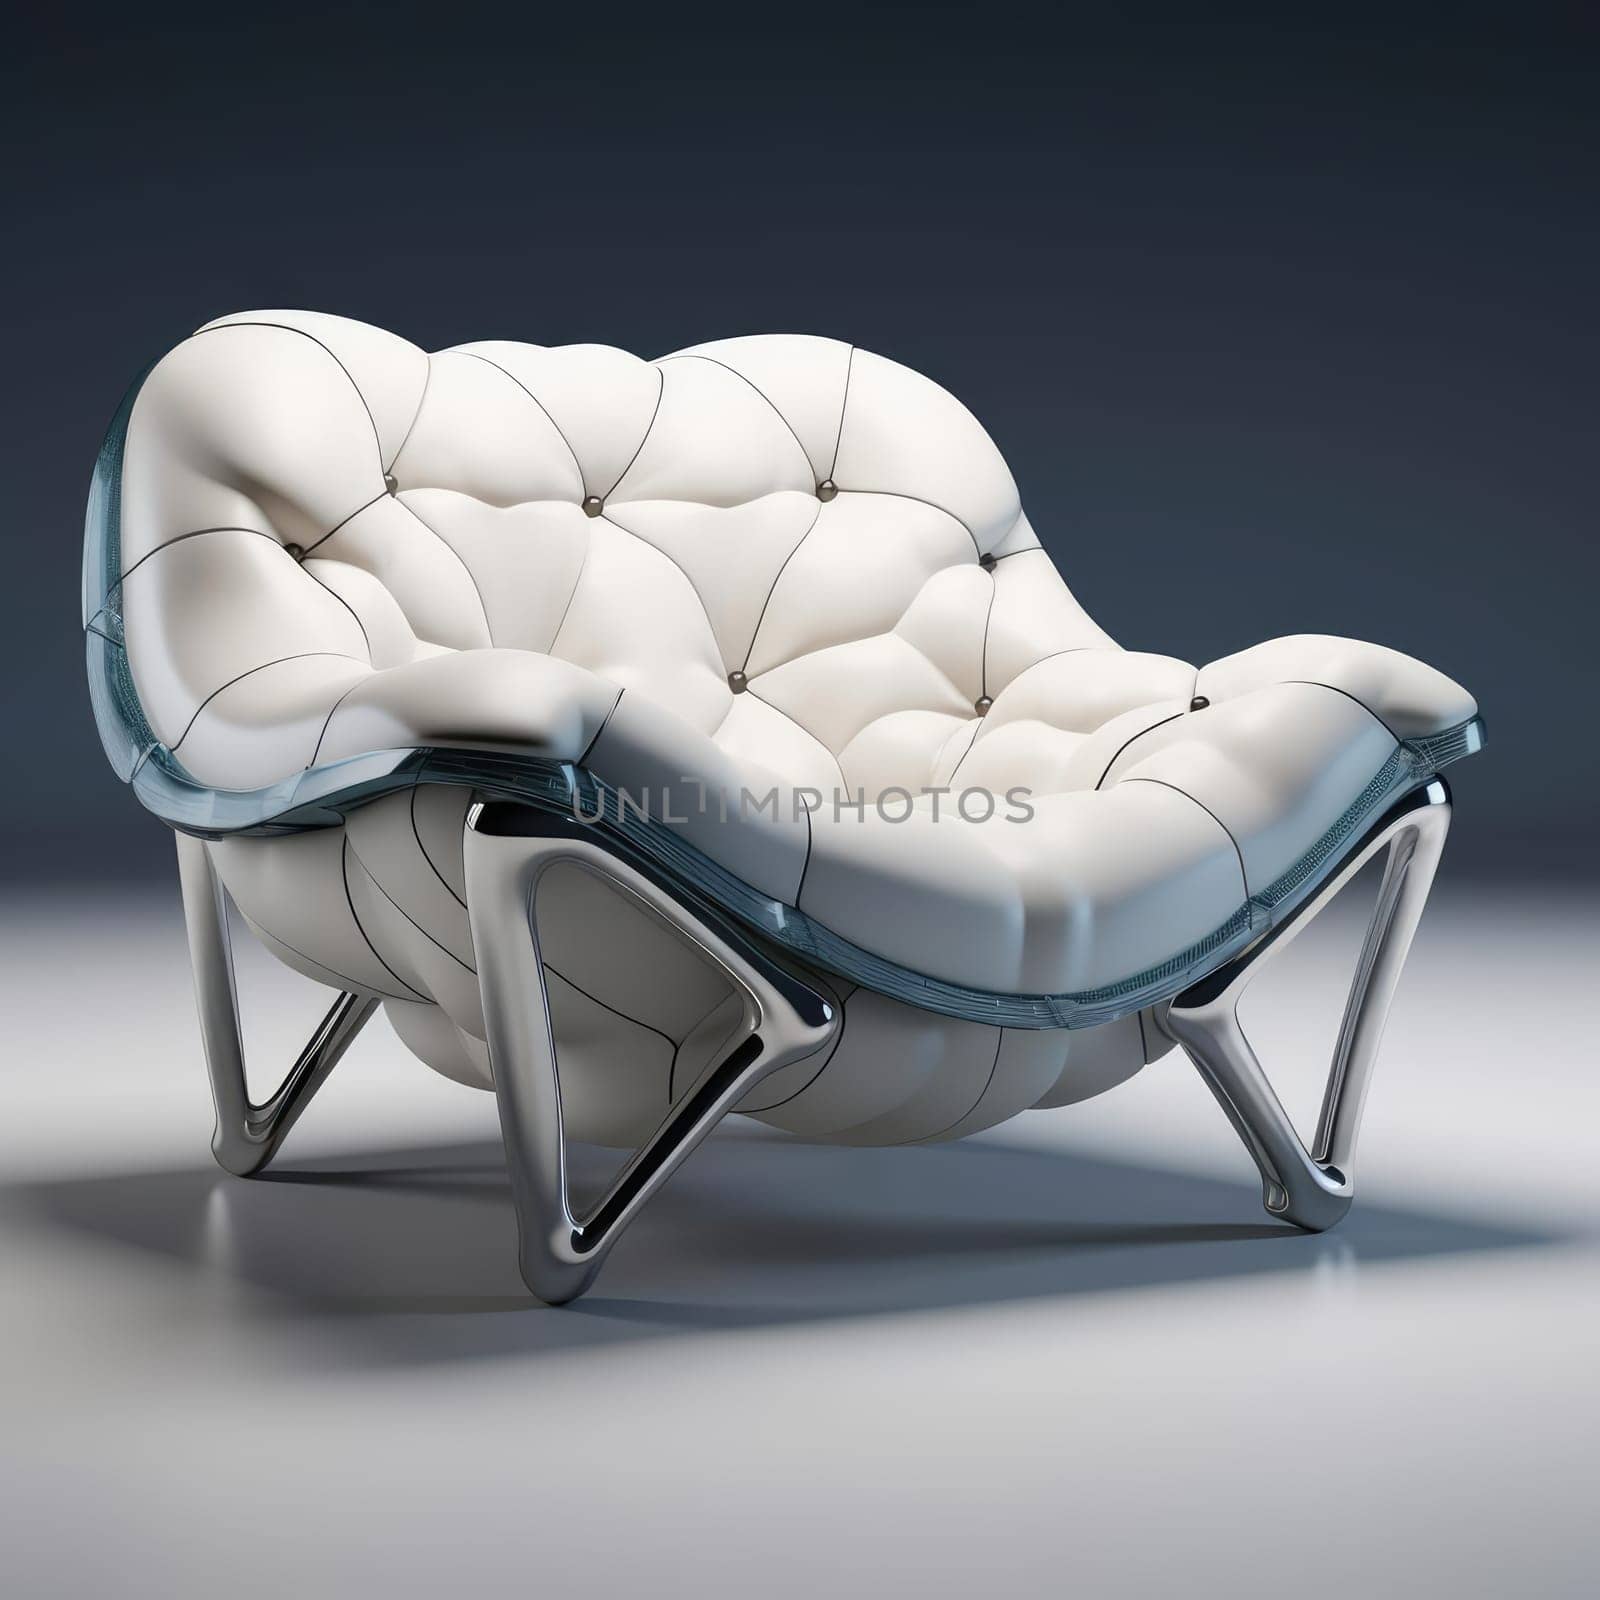 The armchair of the future, soft shapes and shine. On a dark background